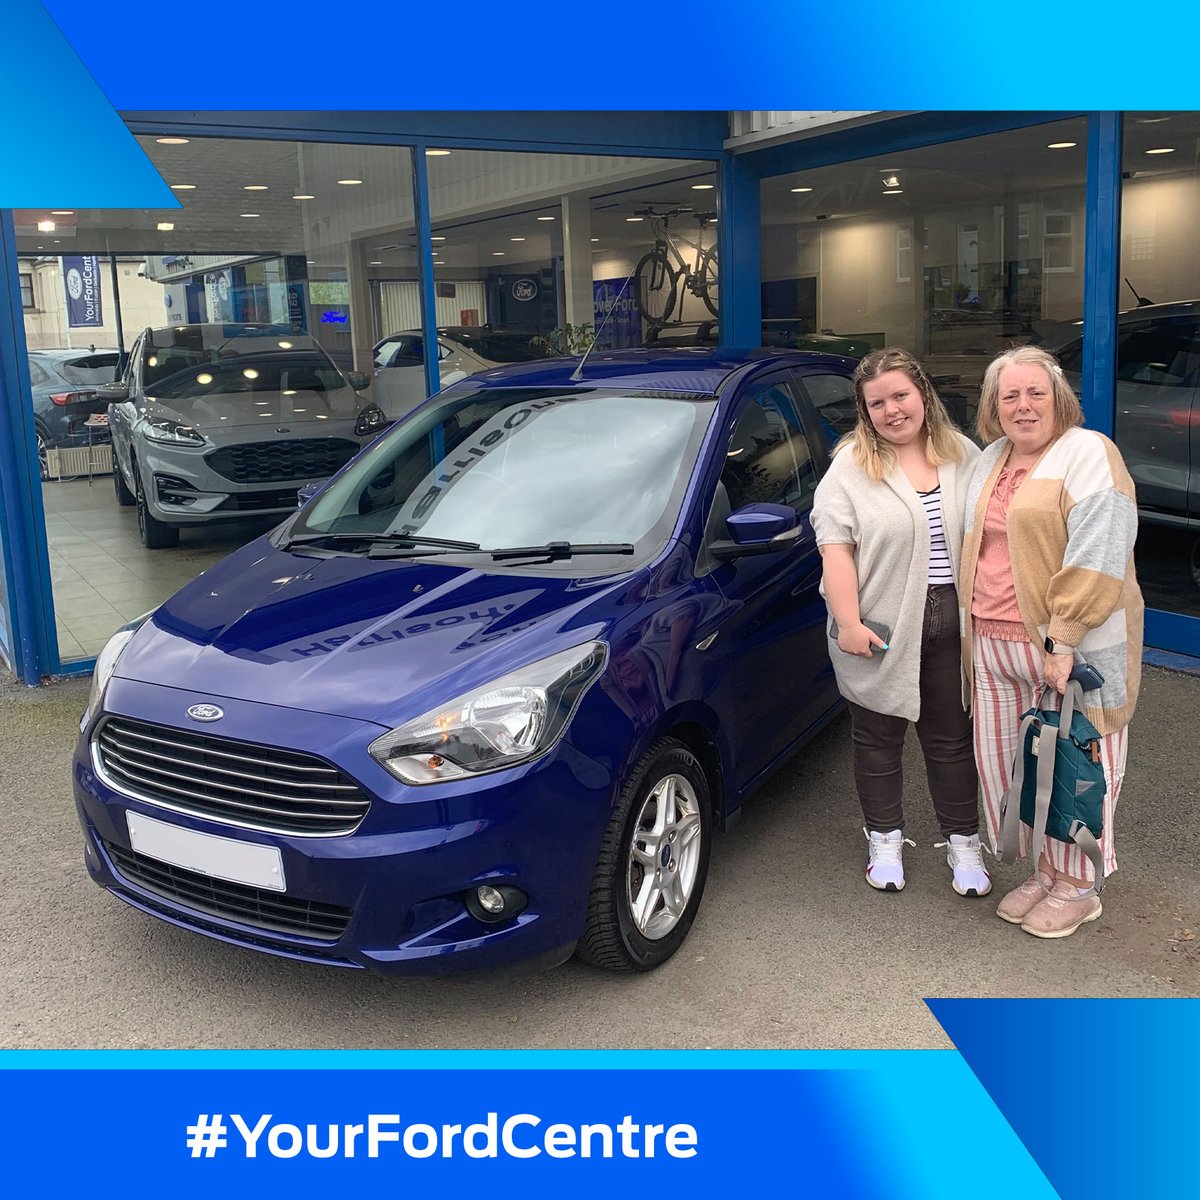 Kathleen and her mum are set to hit the road in Kathleen's new Ka+, picked up from #YourFordCentre Harrisons. 🚗✨

NEW CAR OFFERS: ow.ly/SPBU50RuP6H
USED CARS OFFERS: ow.ly/3ahM50RuP6G 

#FordUK #FordKa